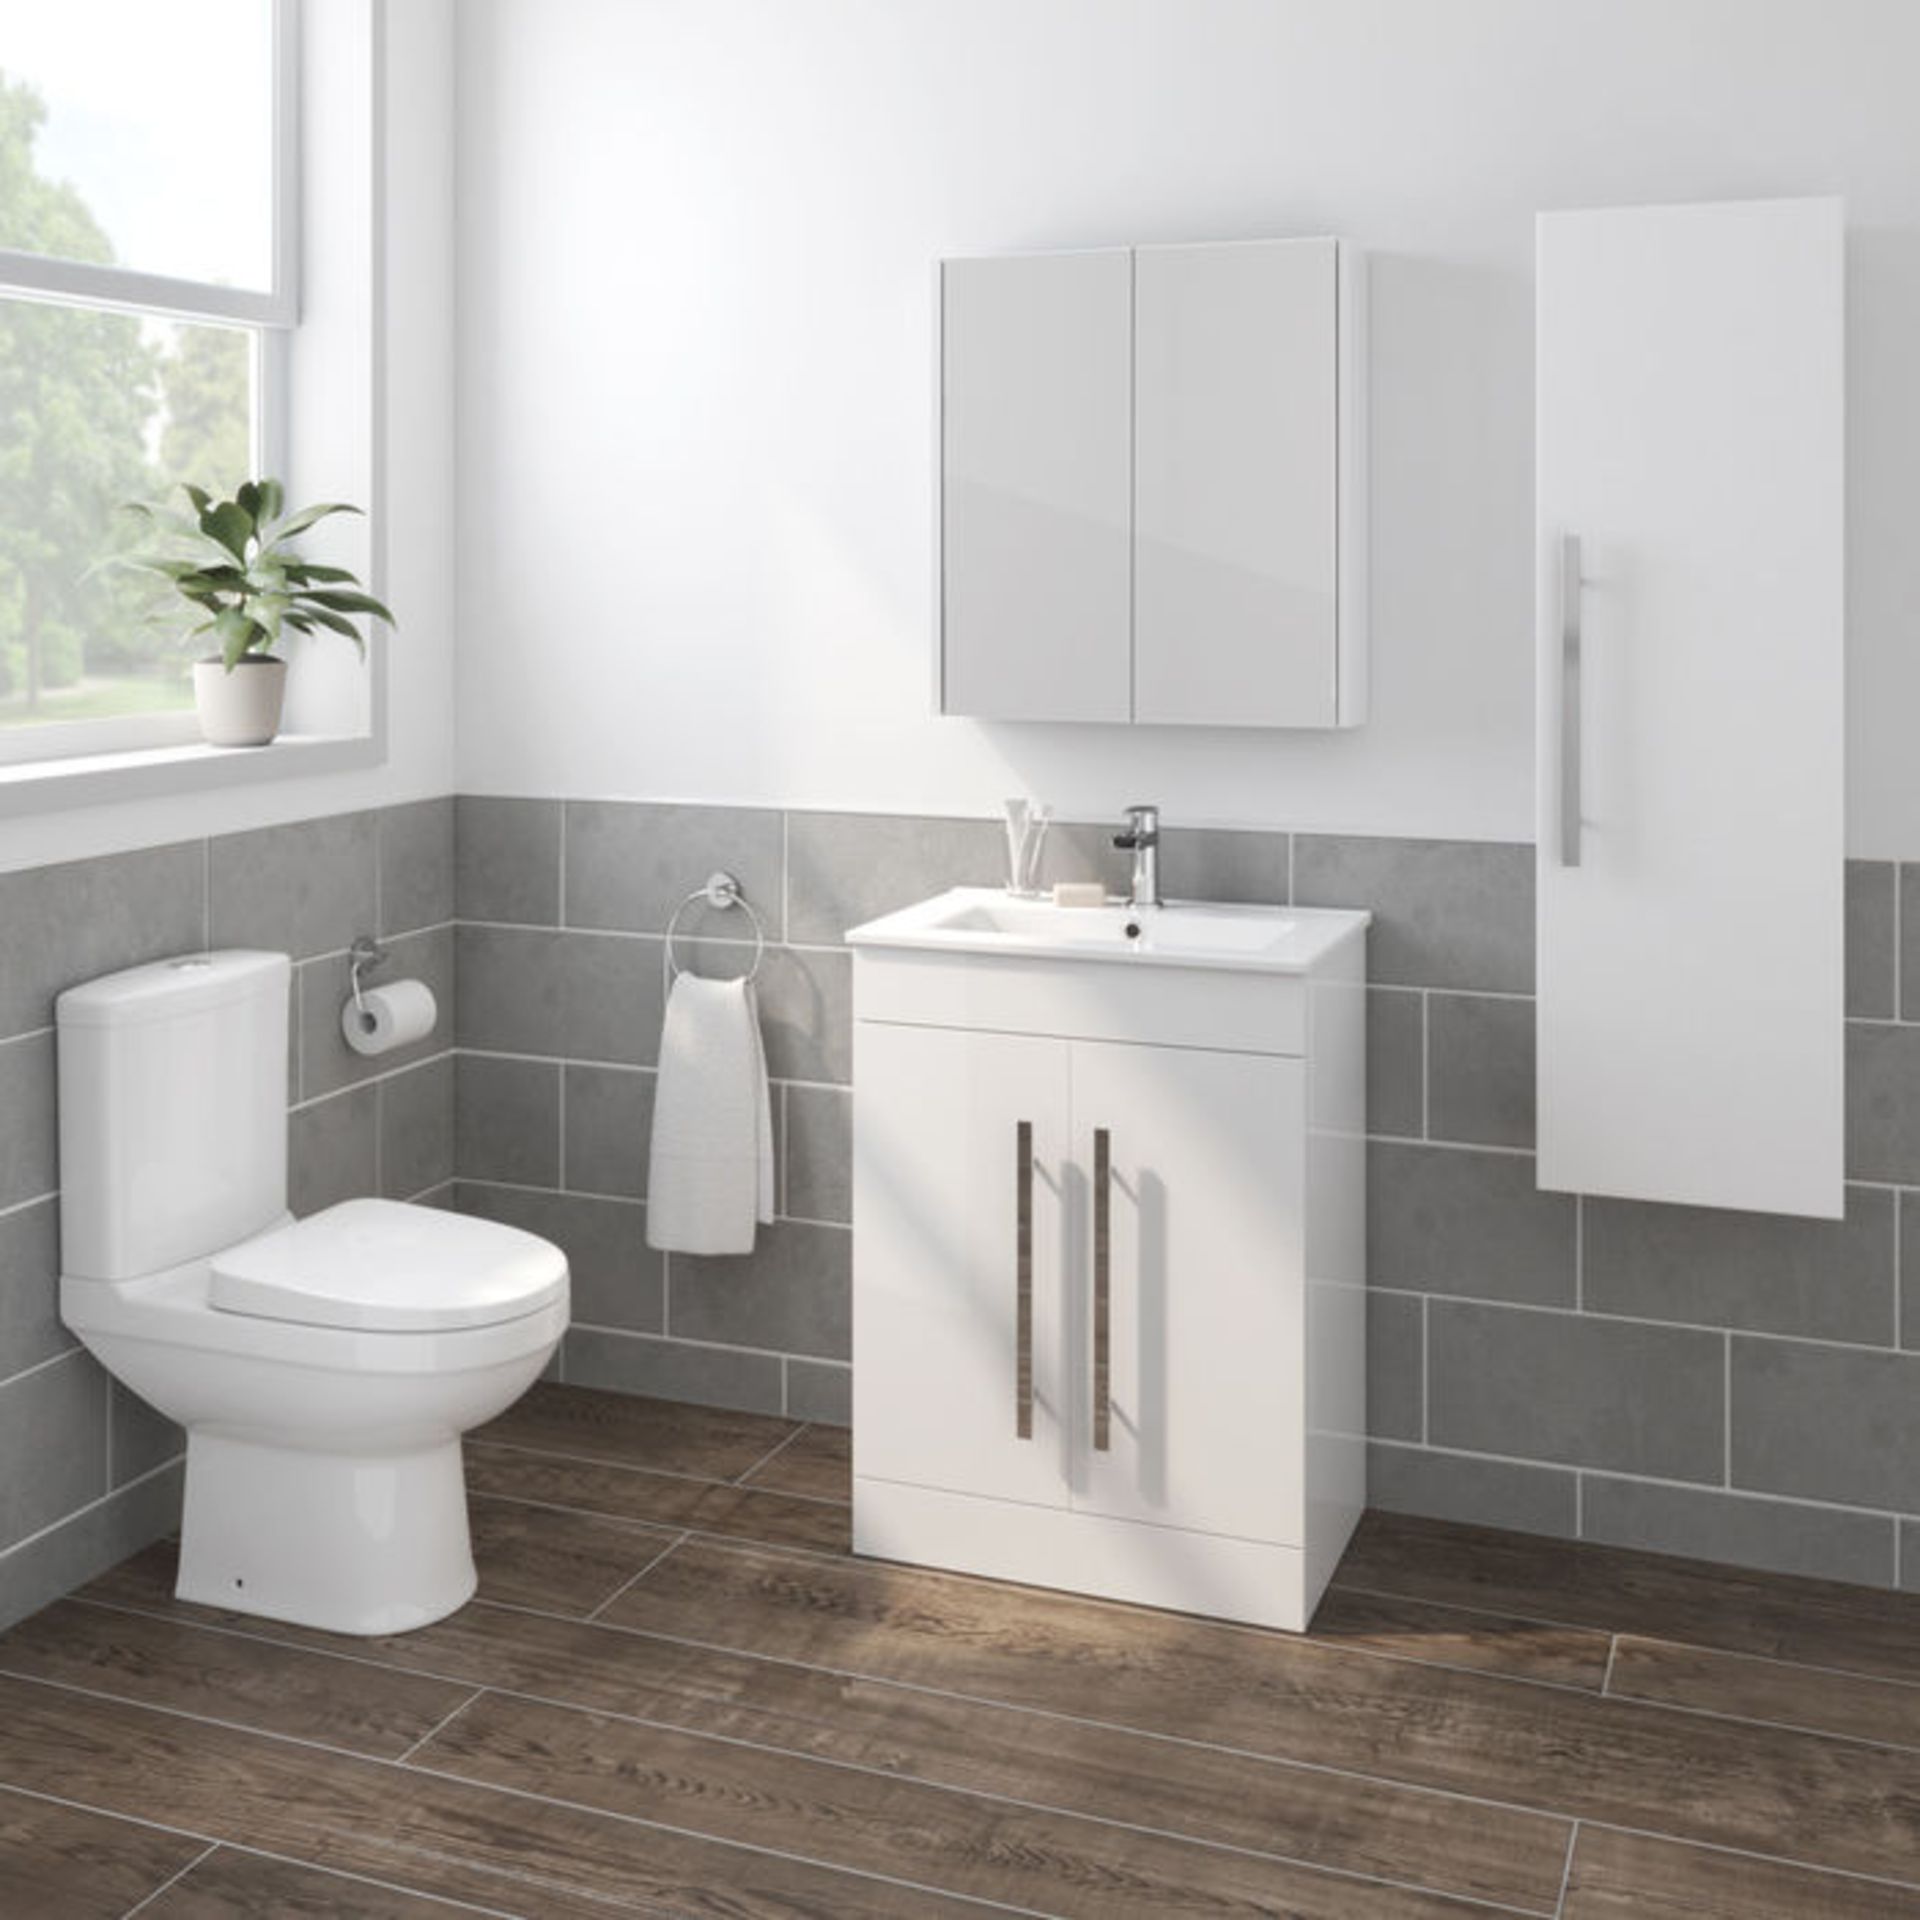 (A67) 600mm Avon High Gloss White Sink Cabinet - Floor Standing. Comes complete with basin. Re... - Image 5 of 5